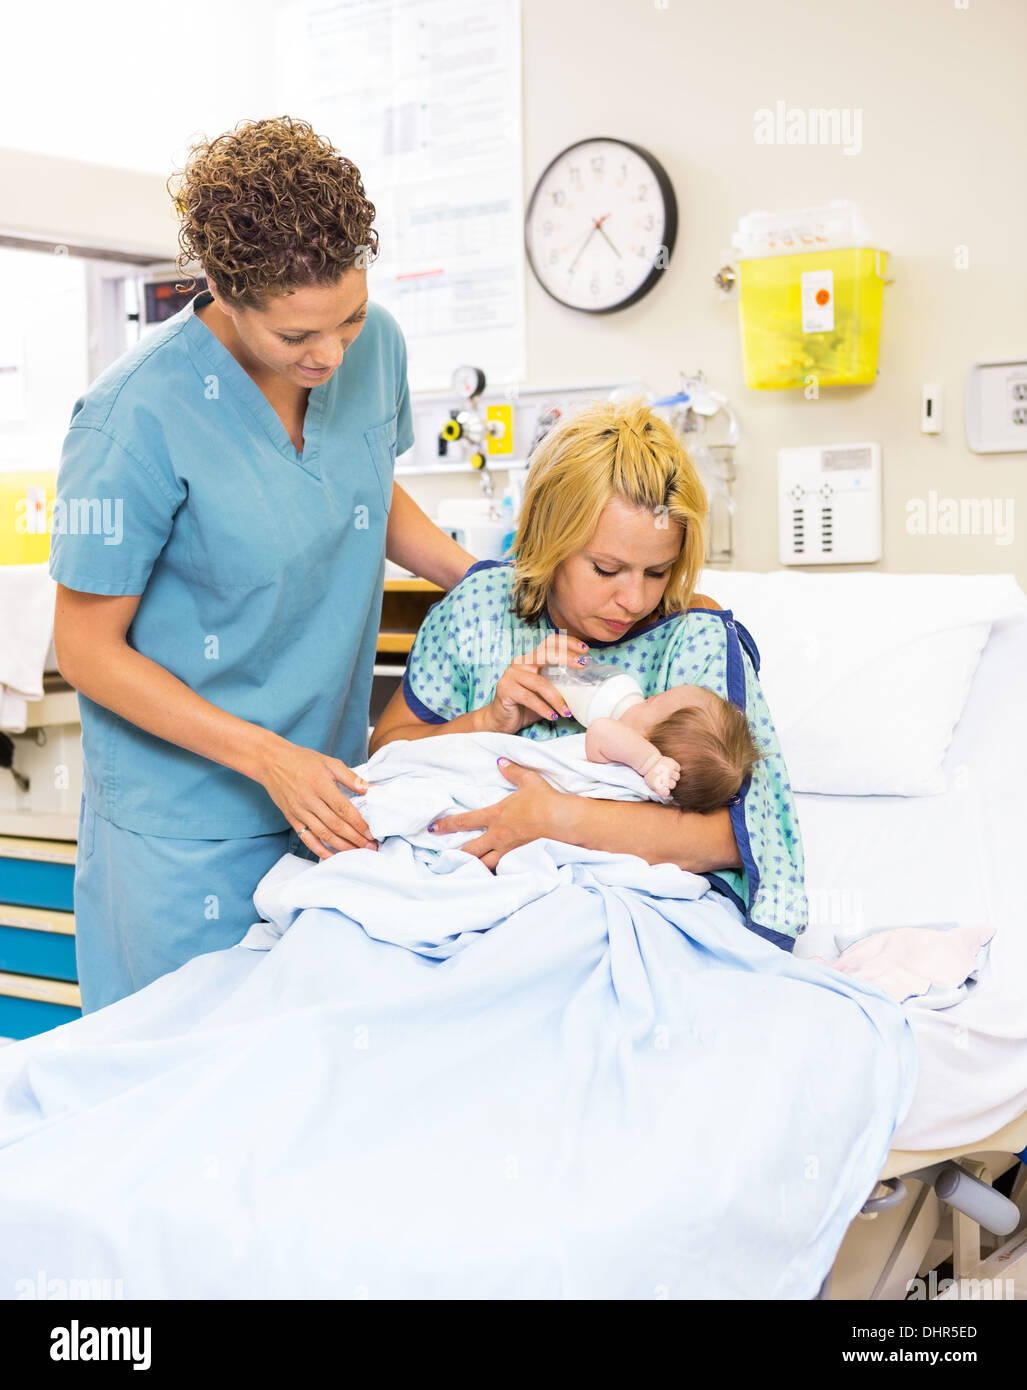 Nurse Looking At Patient Feeding Milk To Baby At Hospital Stock Photo